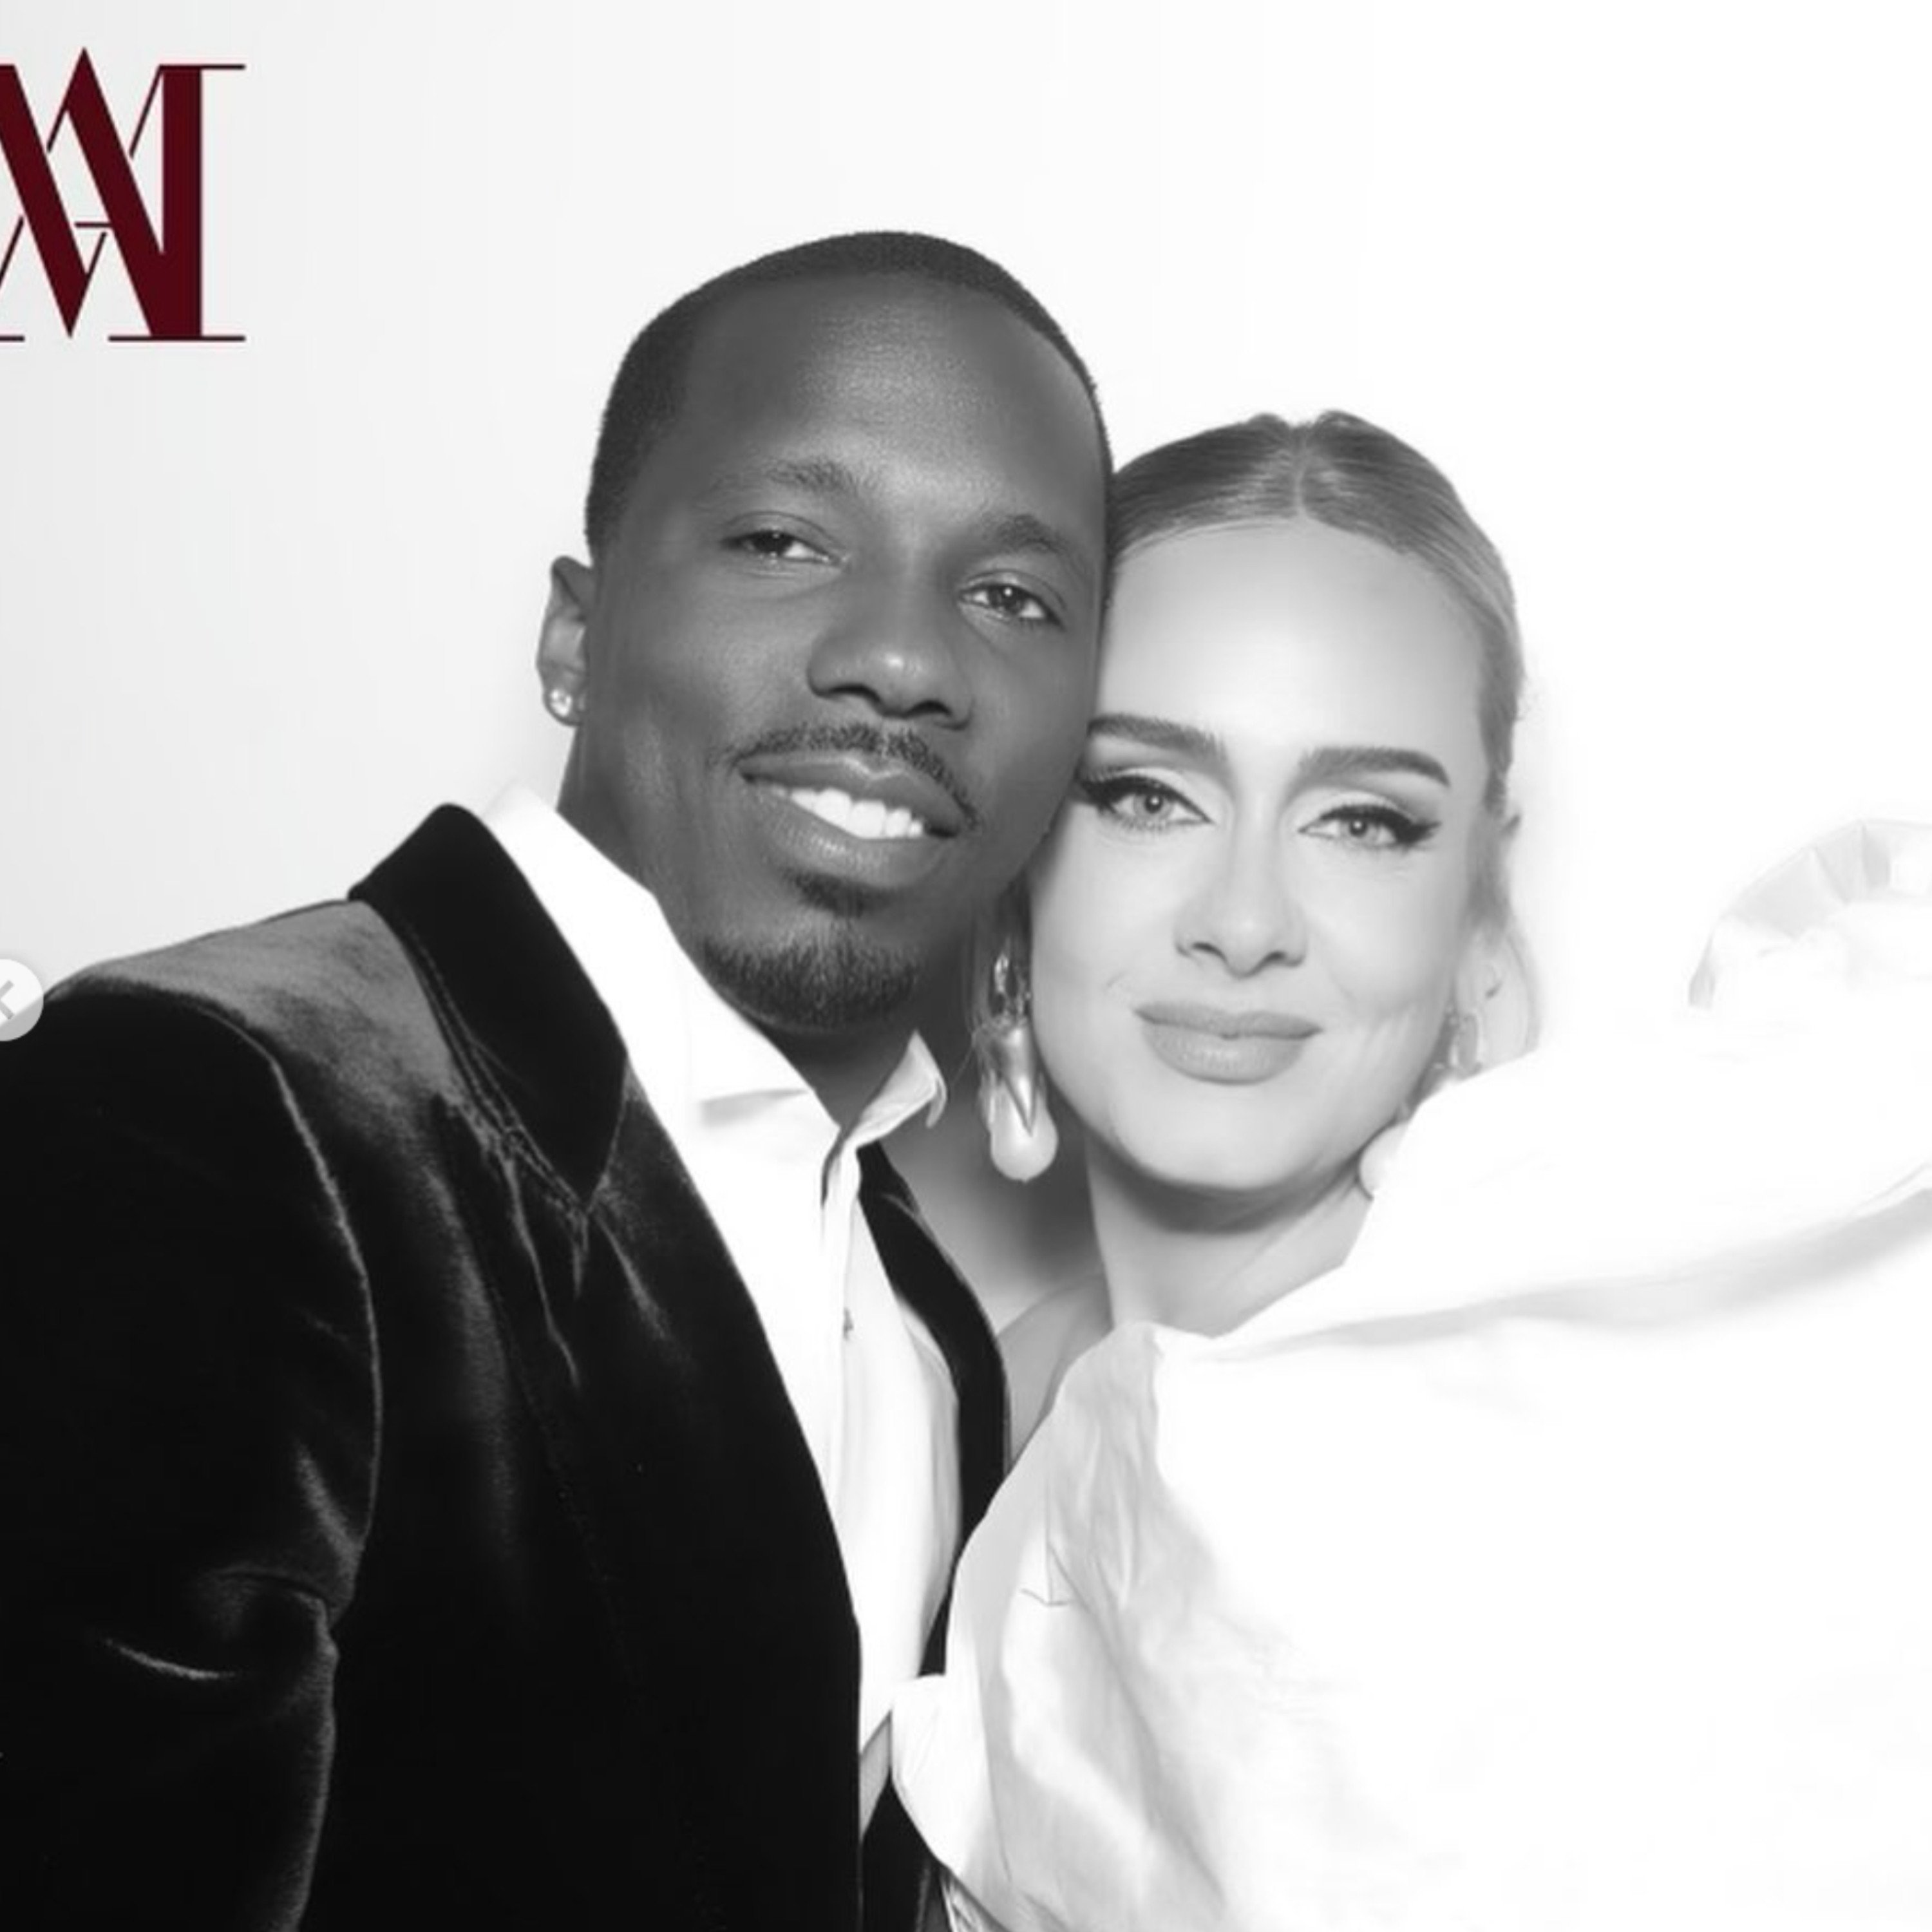 Rich Paul and Adele might’ve gotten married in secret. Photo: @adele/Instagram